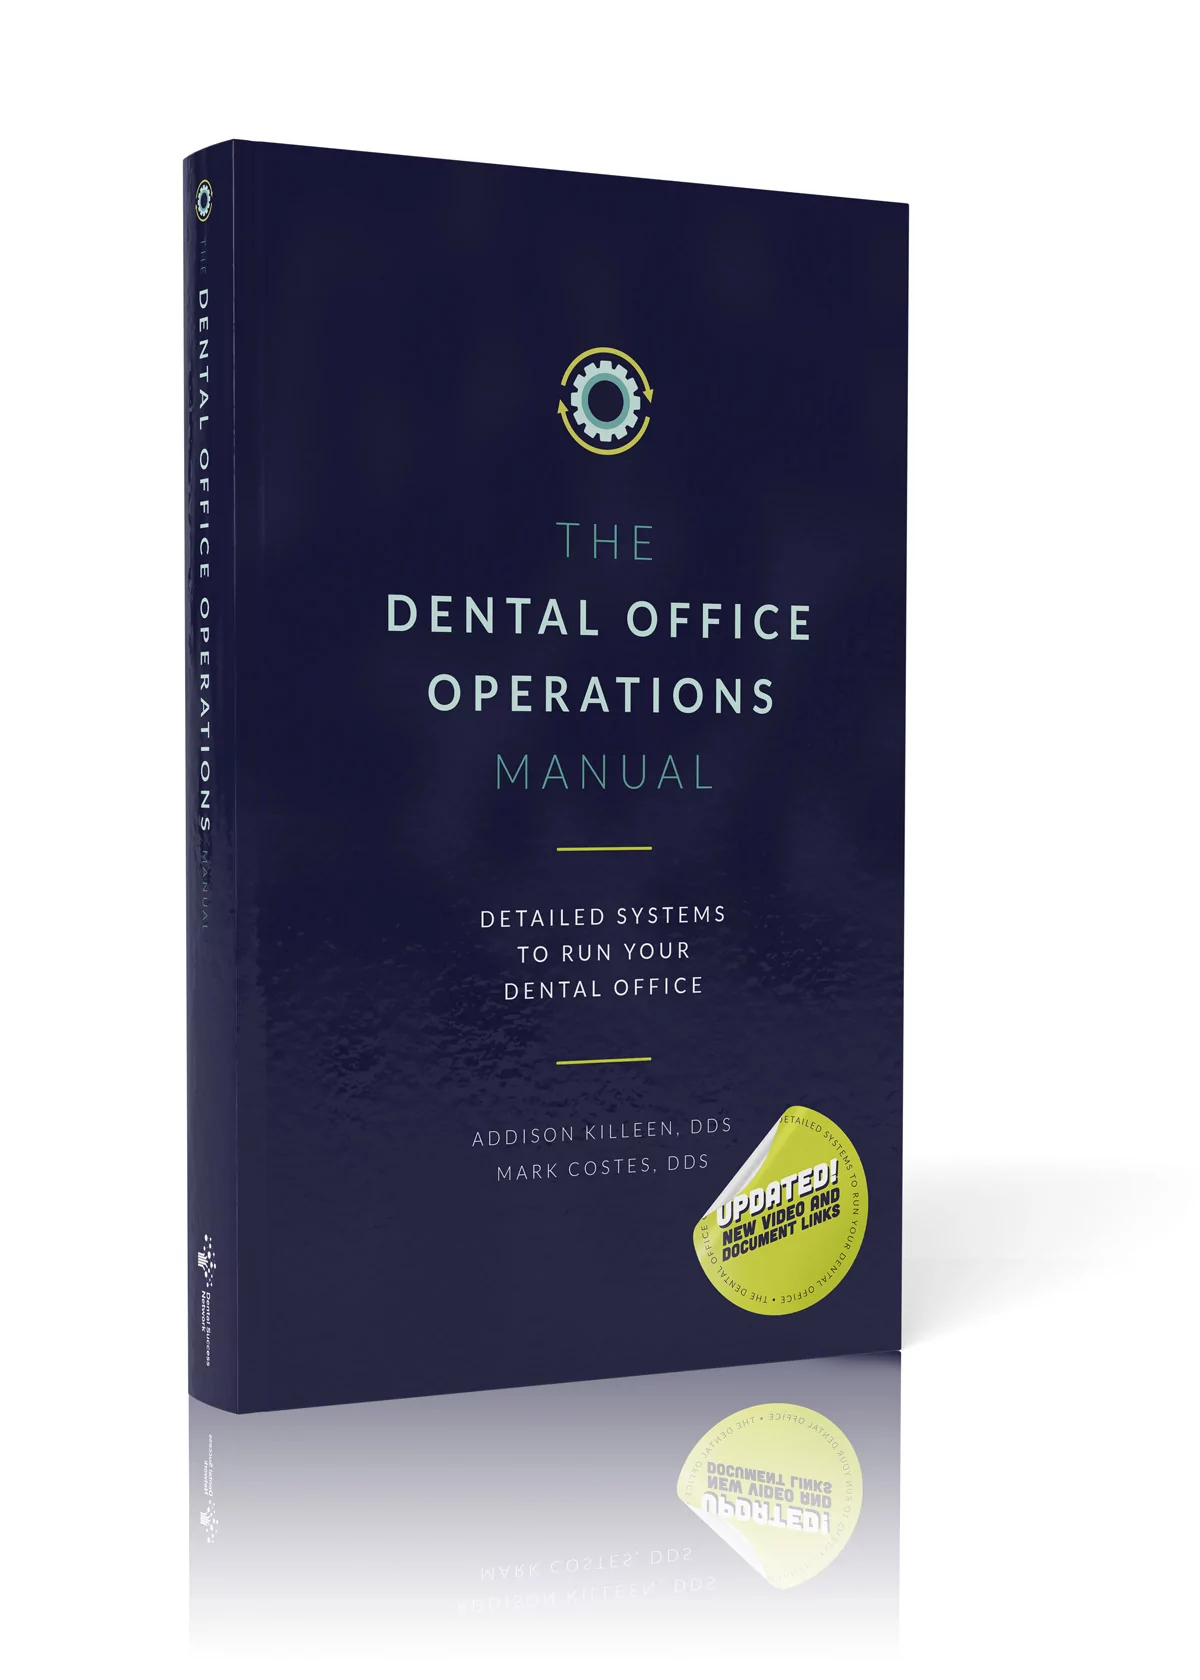 The Dental Office Operations Manual book